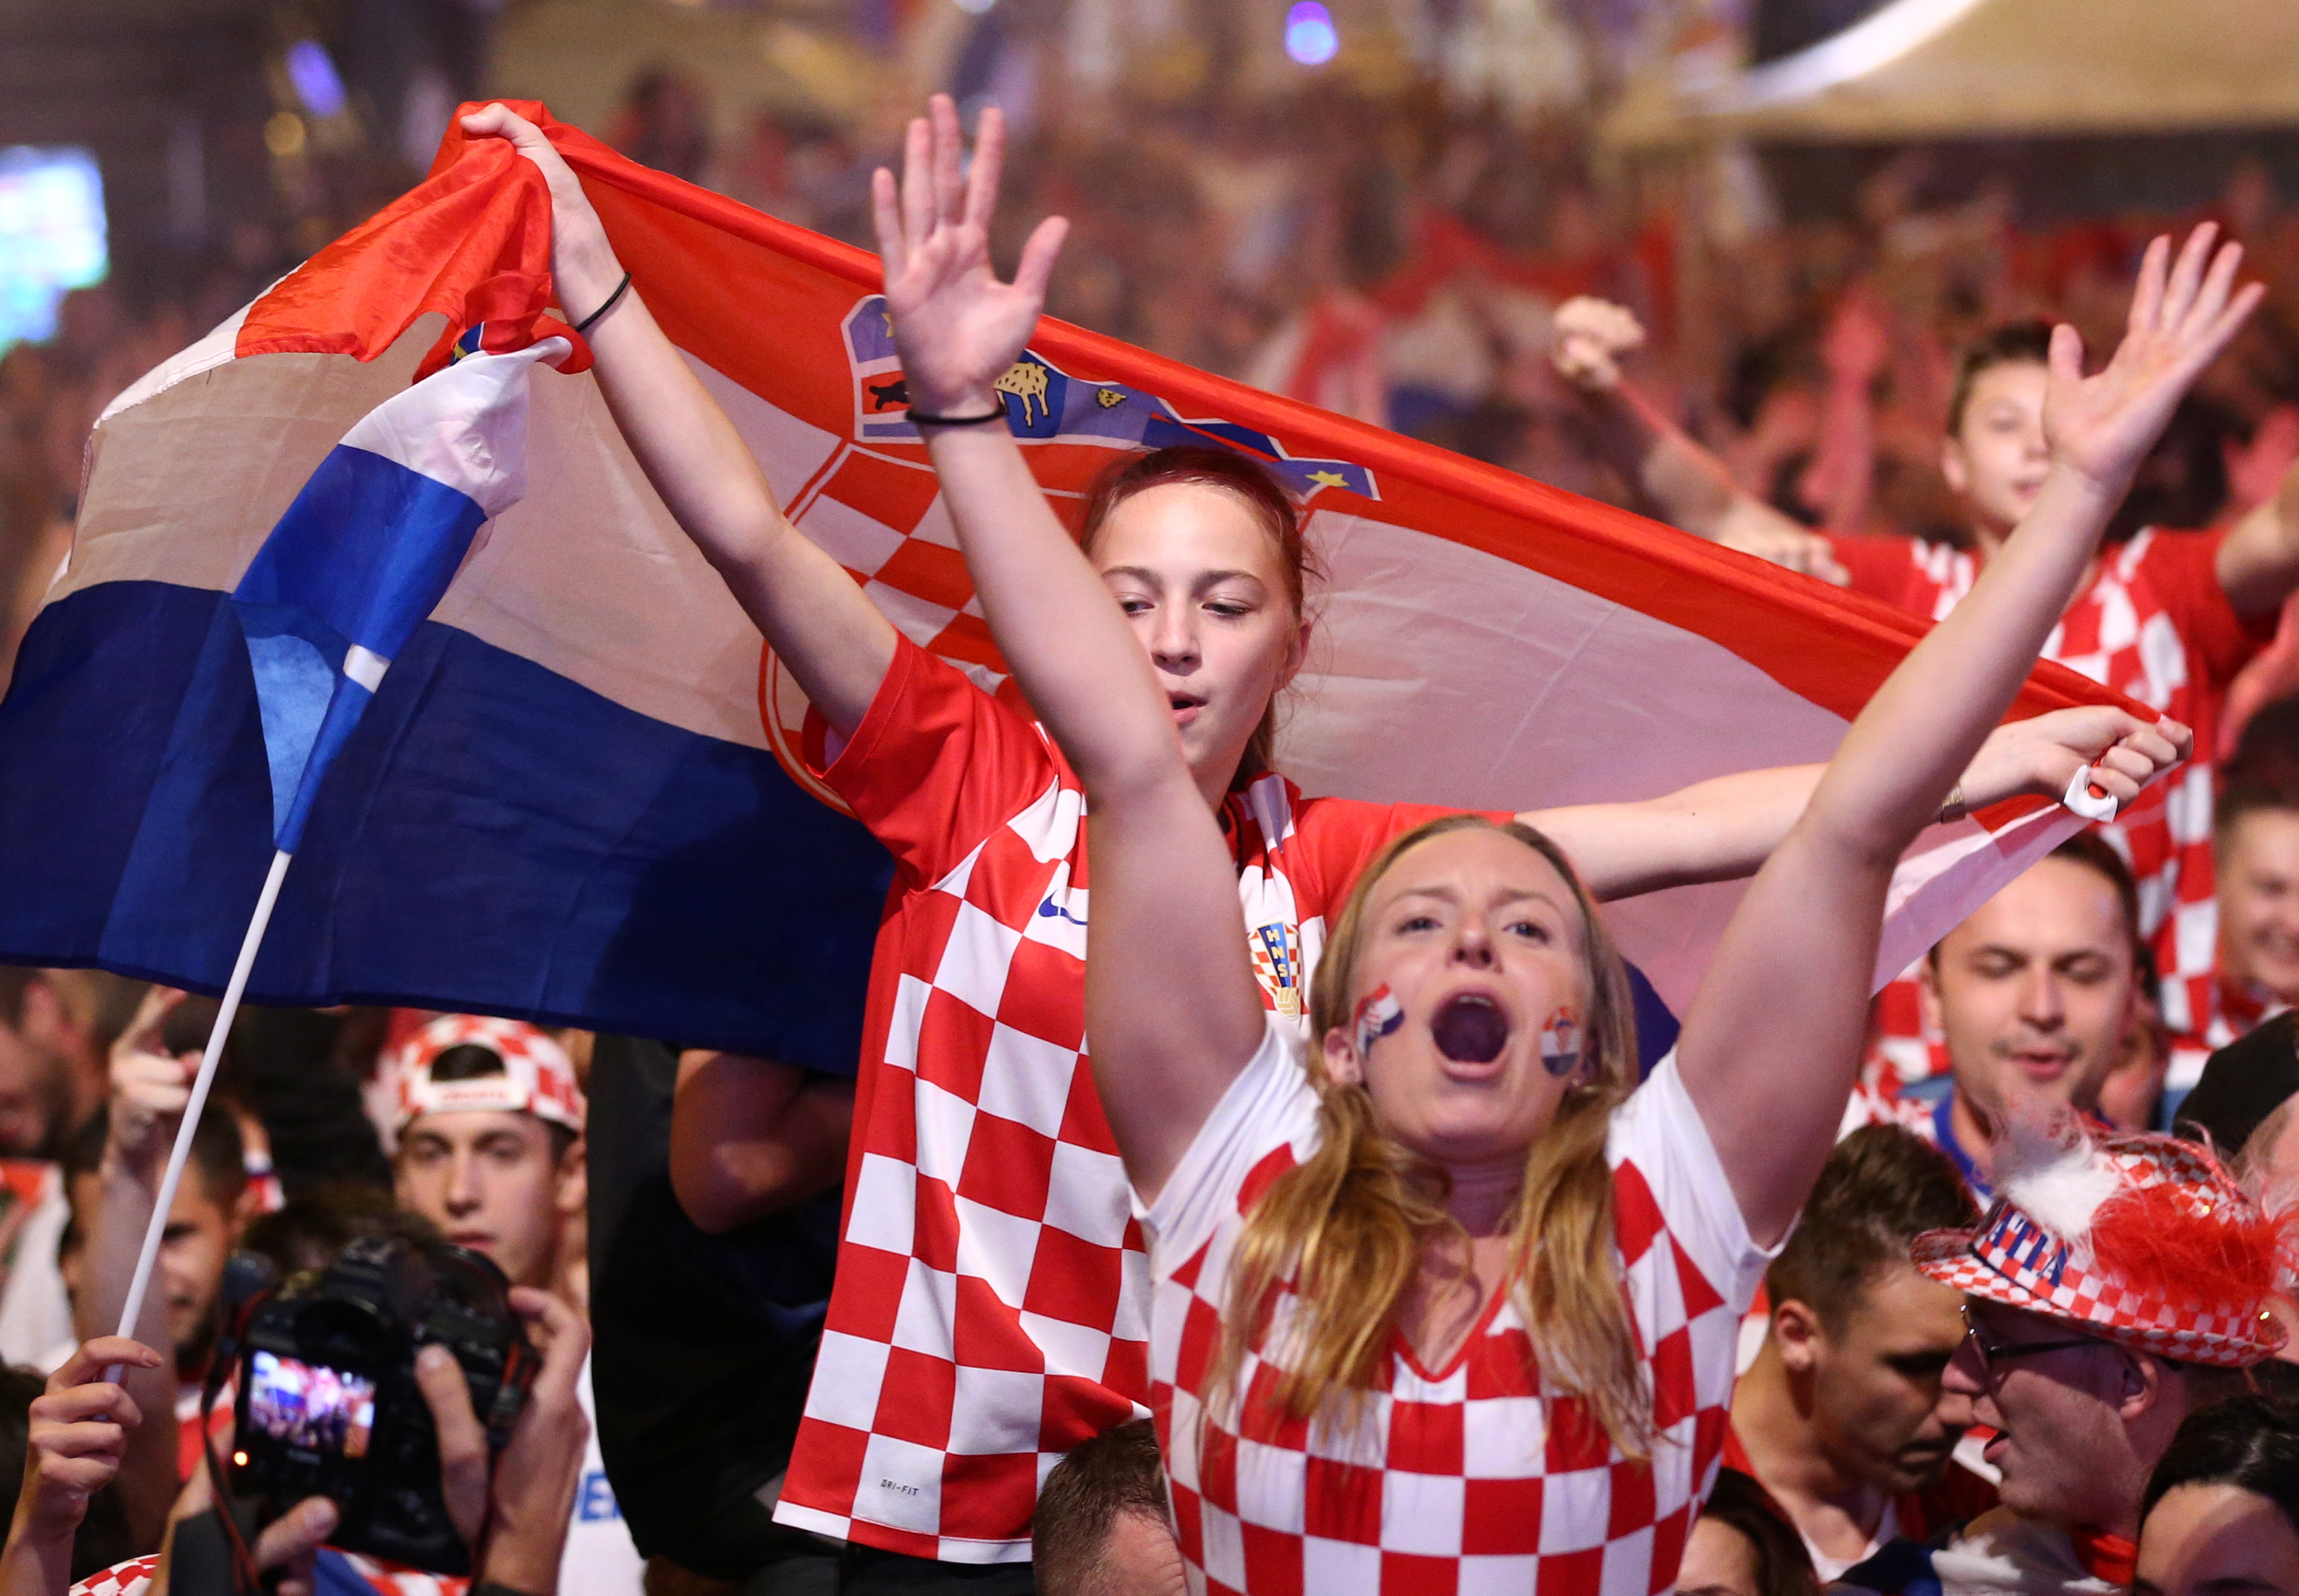 Football: Croatia fans hope to settle old score at World Cup final with France